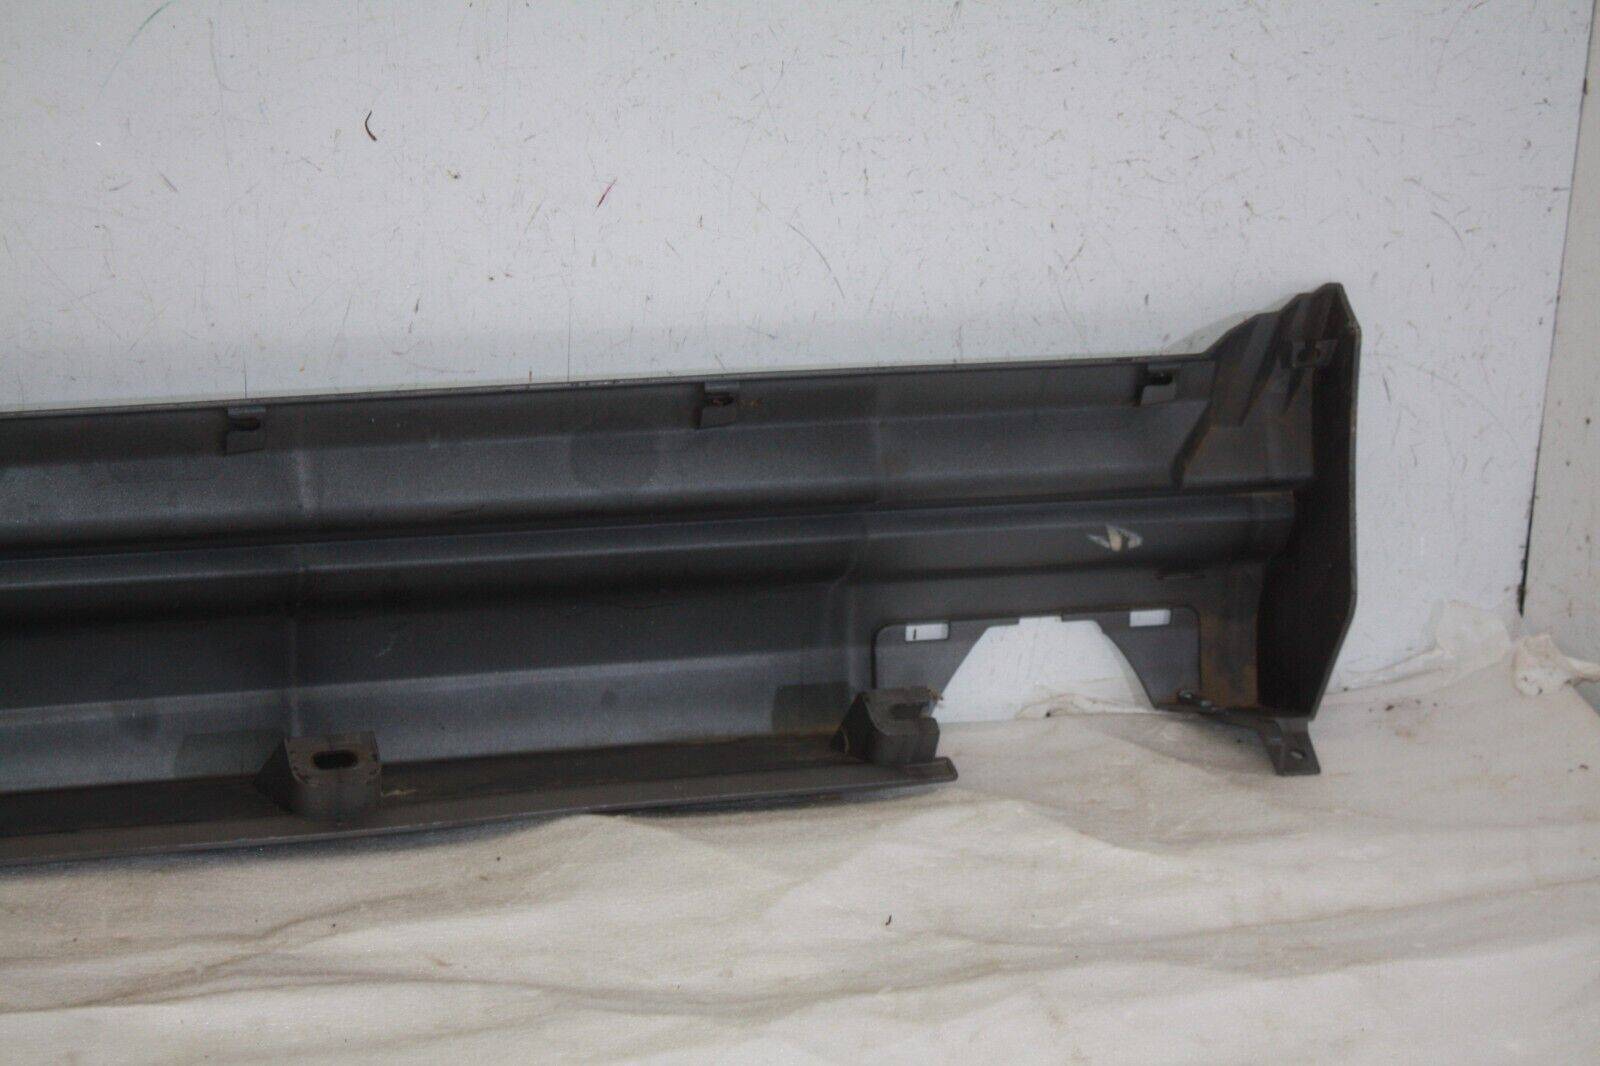 Range-Rover-Autobiography-Right-Side-Skirt-2009-TO-2012-BH4M-200B08-A-Genuine-176202550823-15